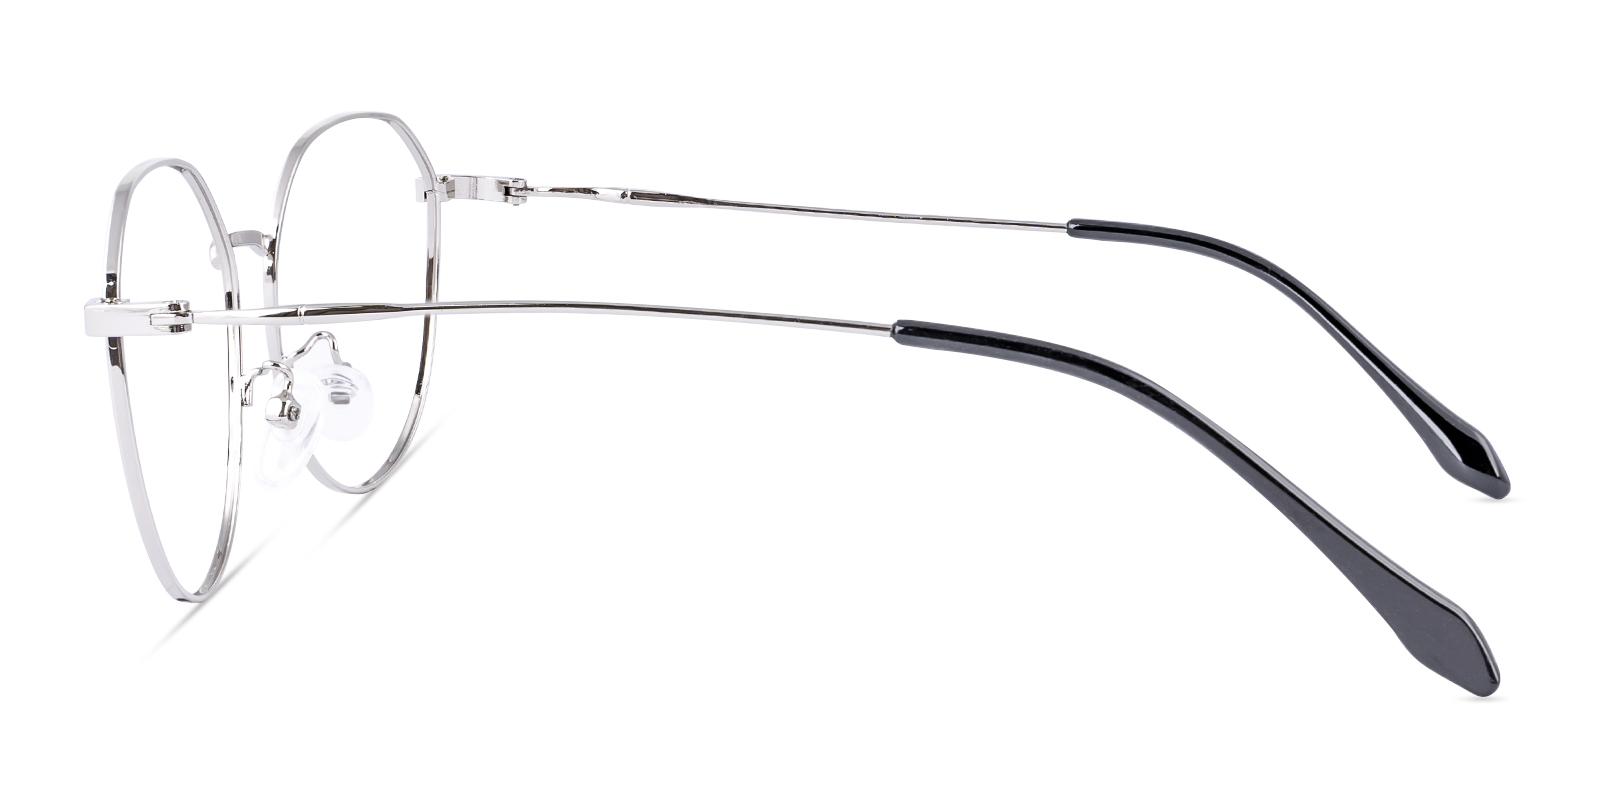 Lossious Silver Metal Eyeglasses , NosePads Frames from ABBE Glasses